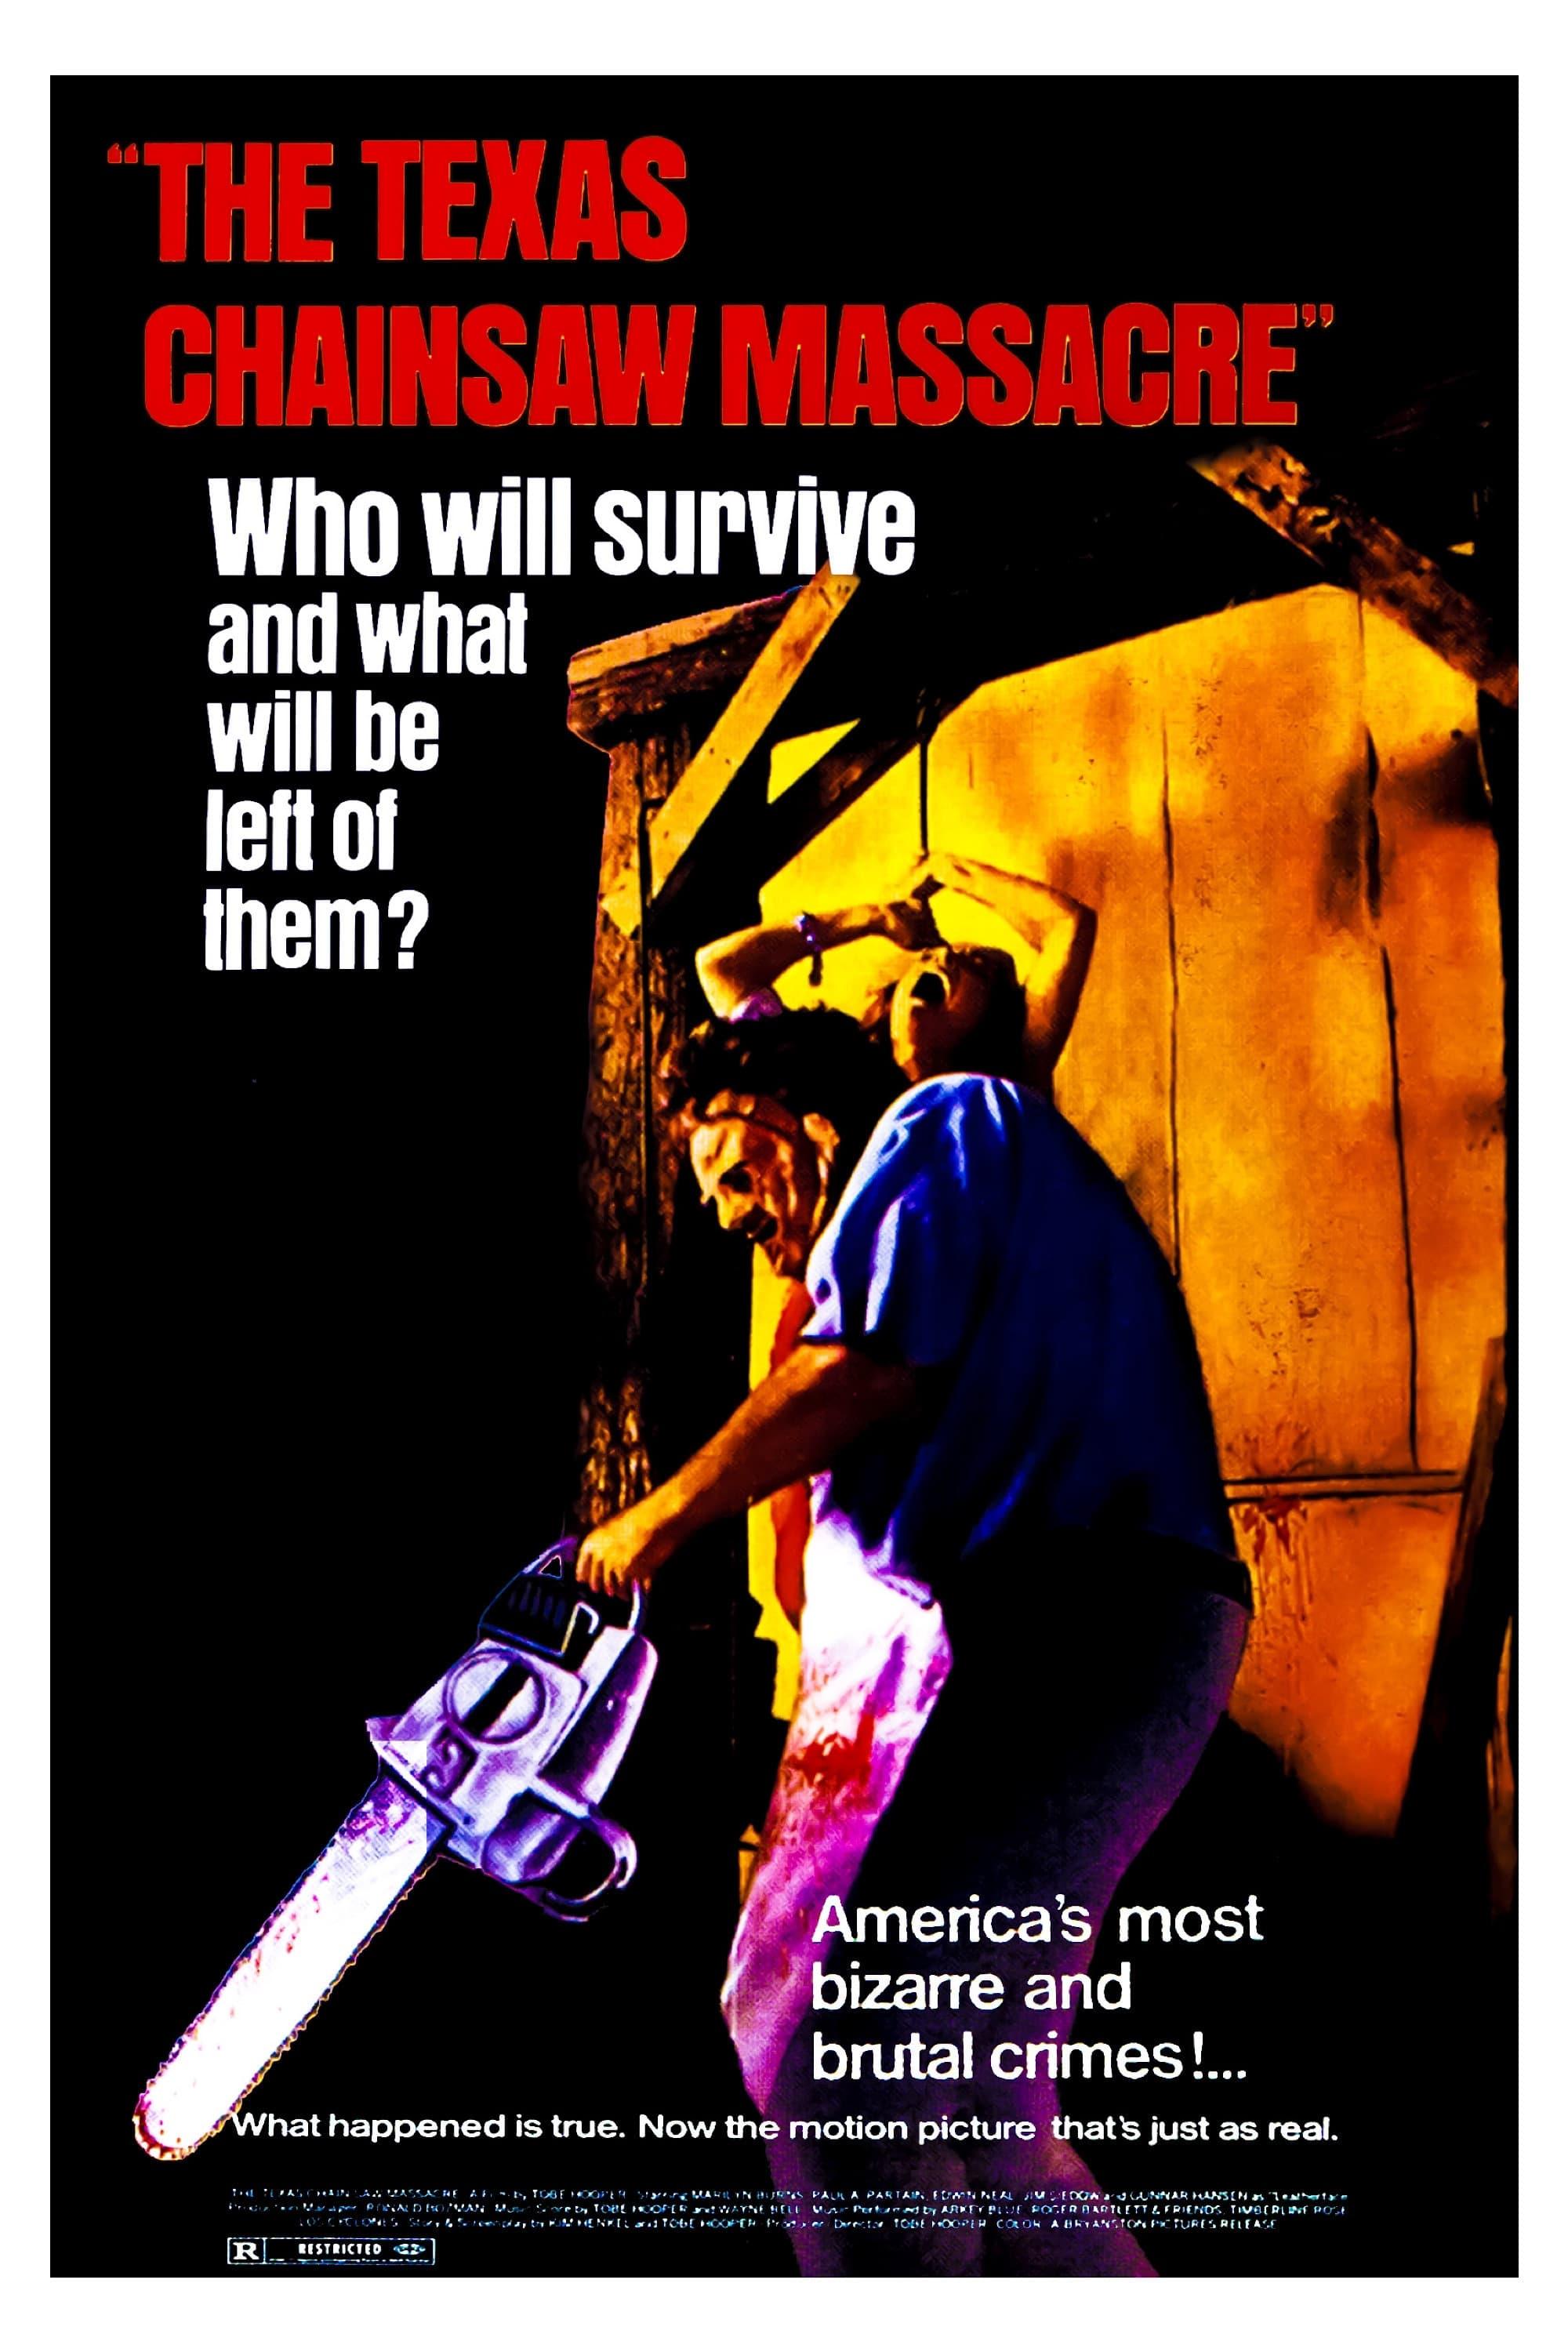 The Texas Chain Saw Massacre poster